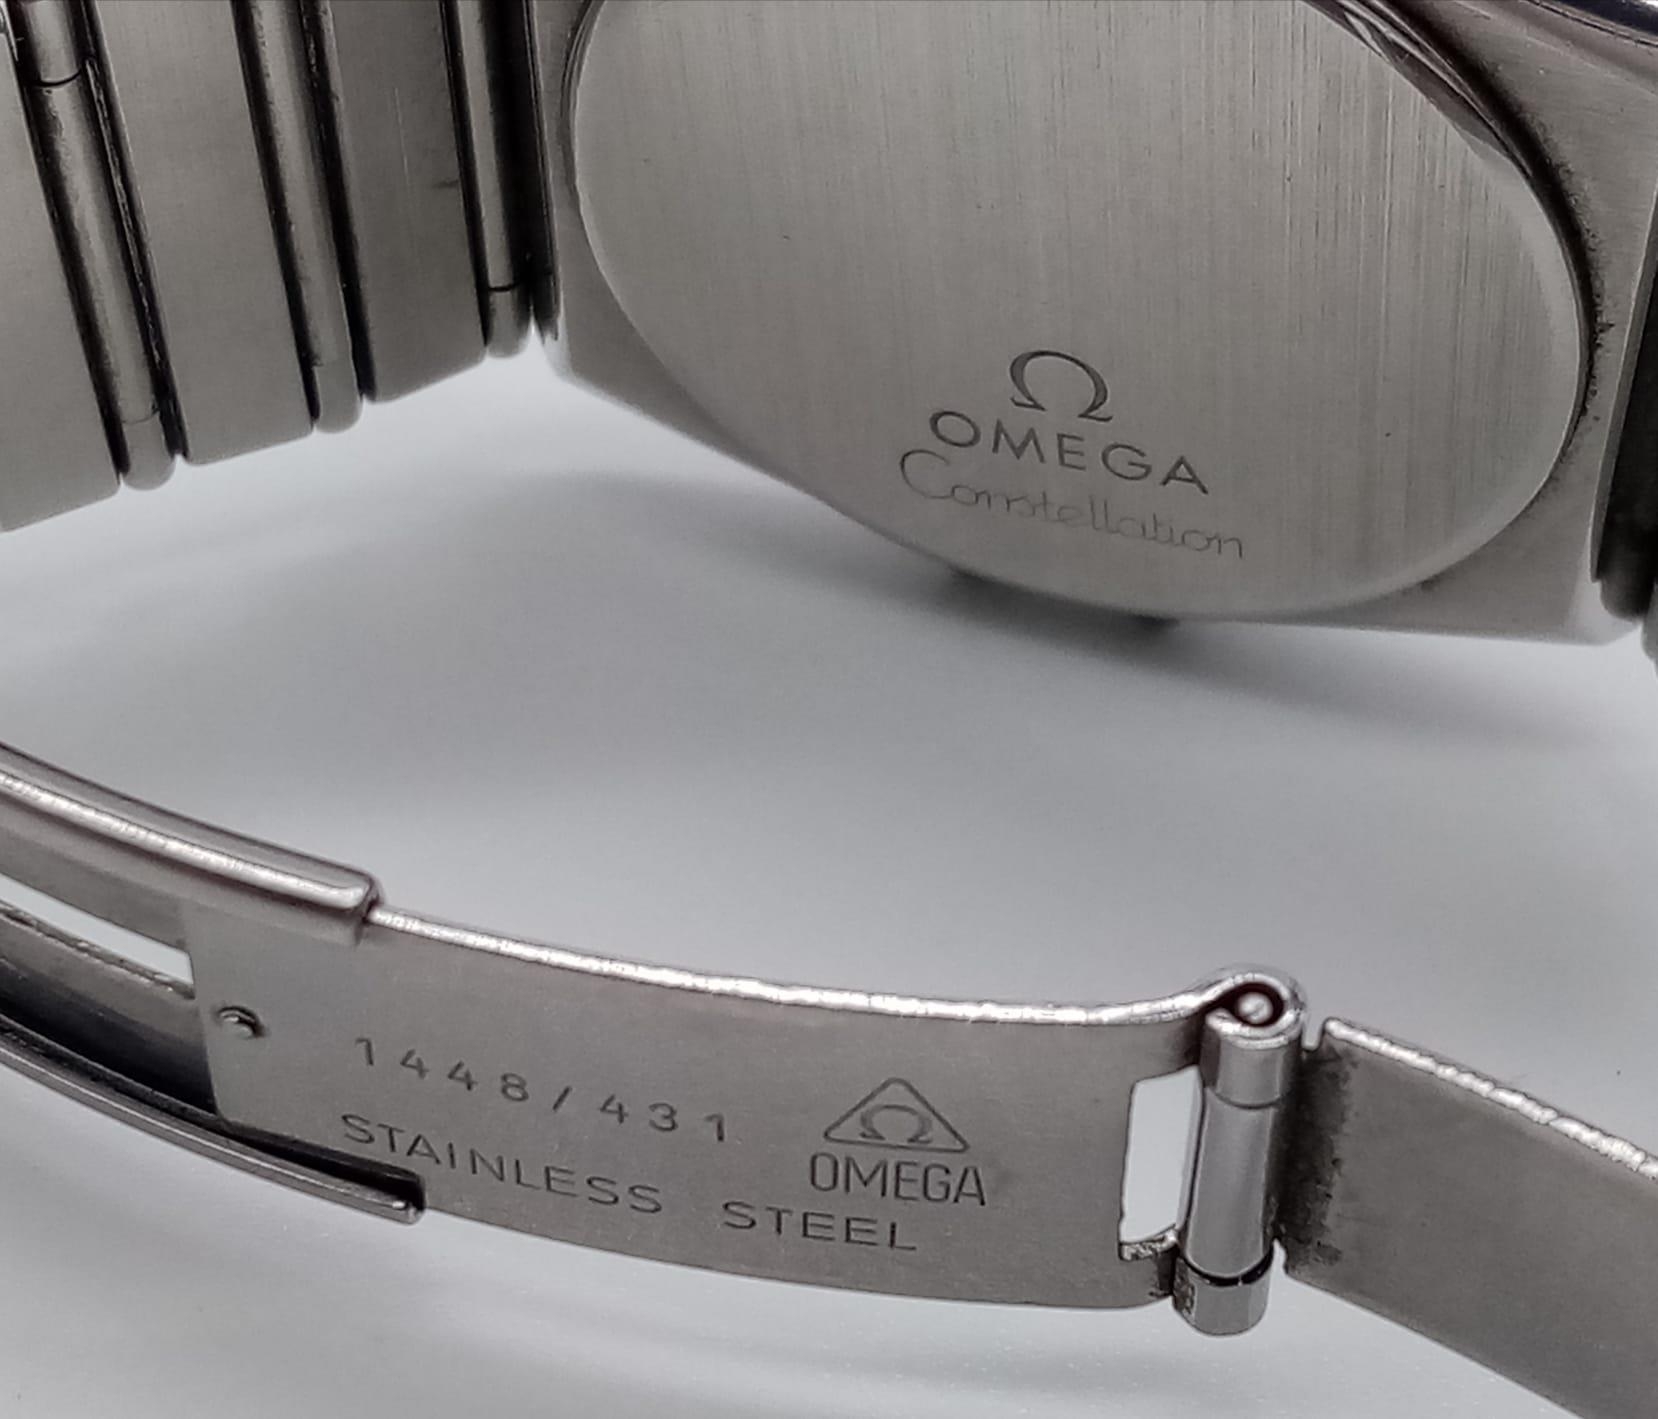 OMEGA CONSTELATION QUARTZ BRACELET WATCH WITH ORIGINAL BOX AND PAPERS. 32mm. Needs batteries. - Image 5 of 13